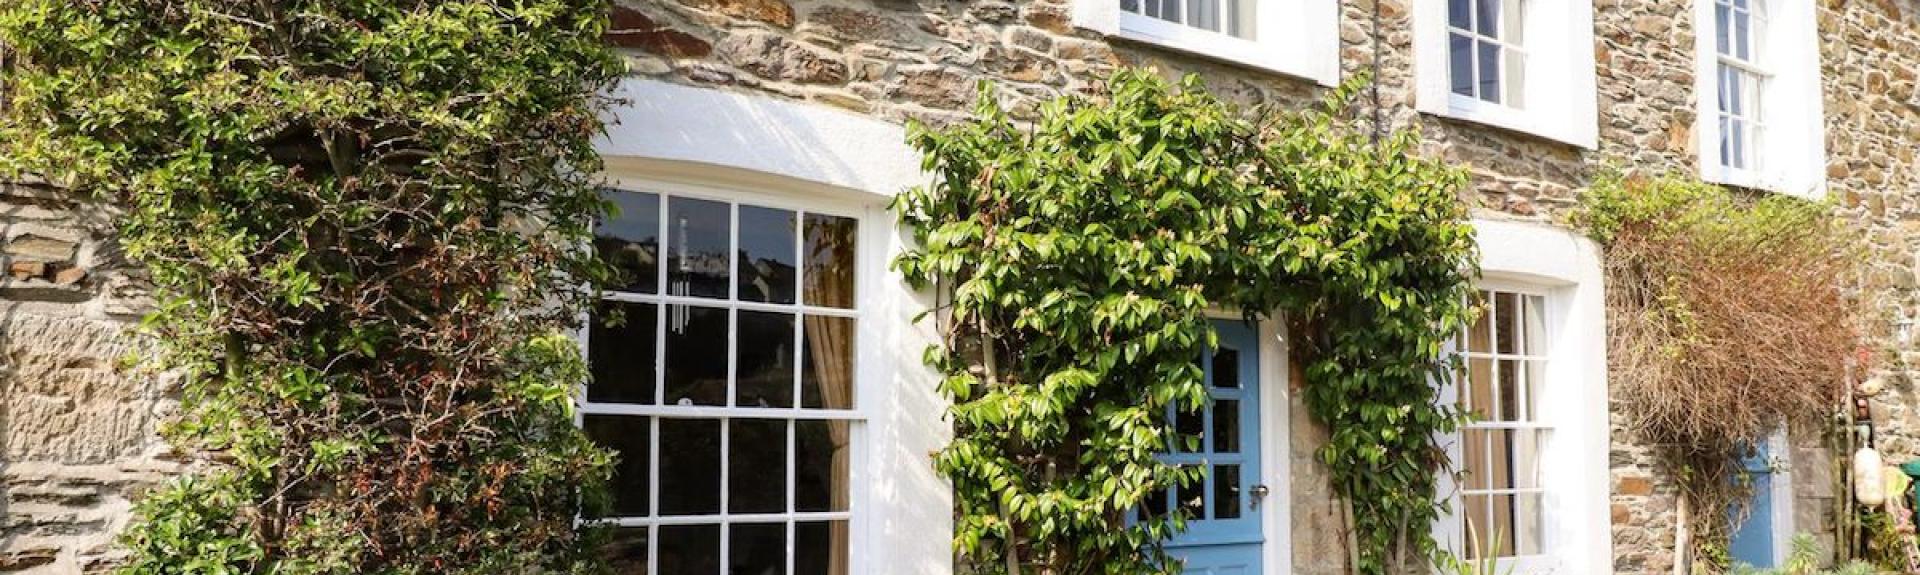 Exterior of a wisteria-clad, terraced holiday cottage in Mevagissey overlooking a cobbled street.